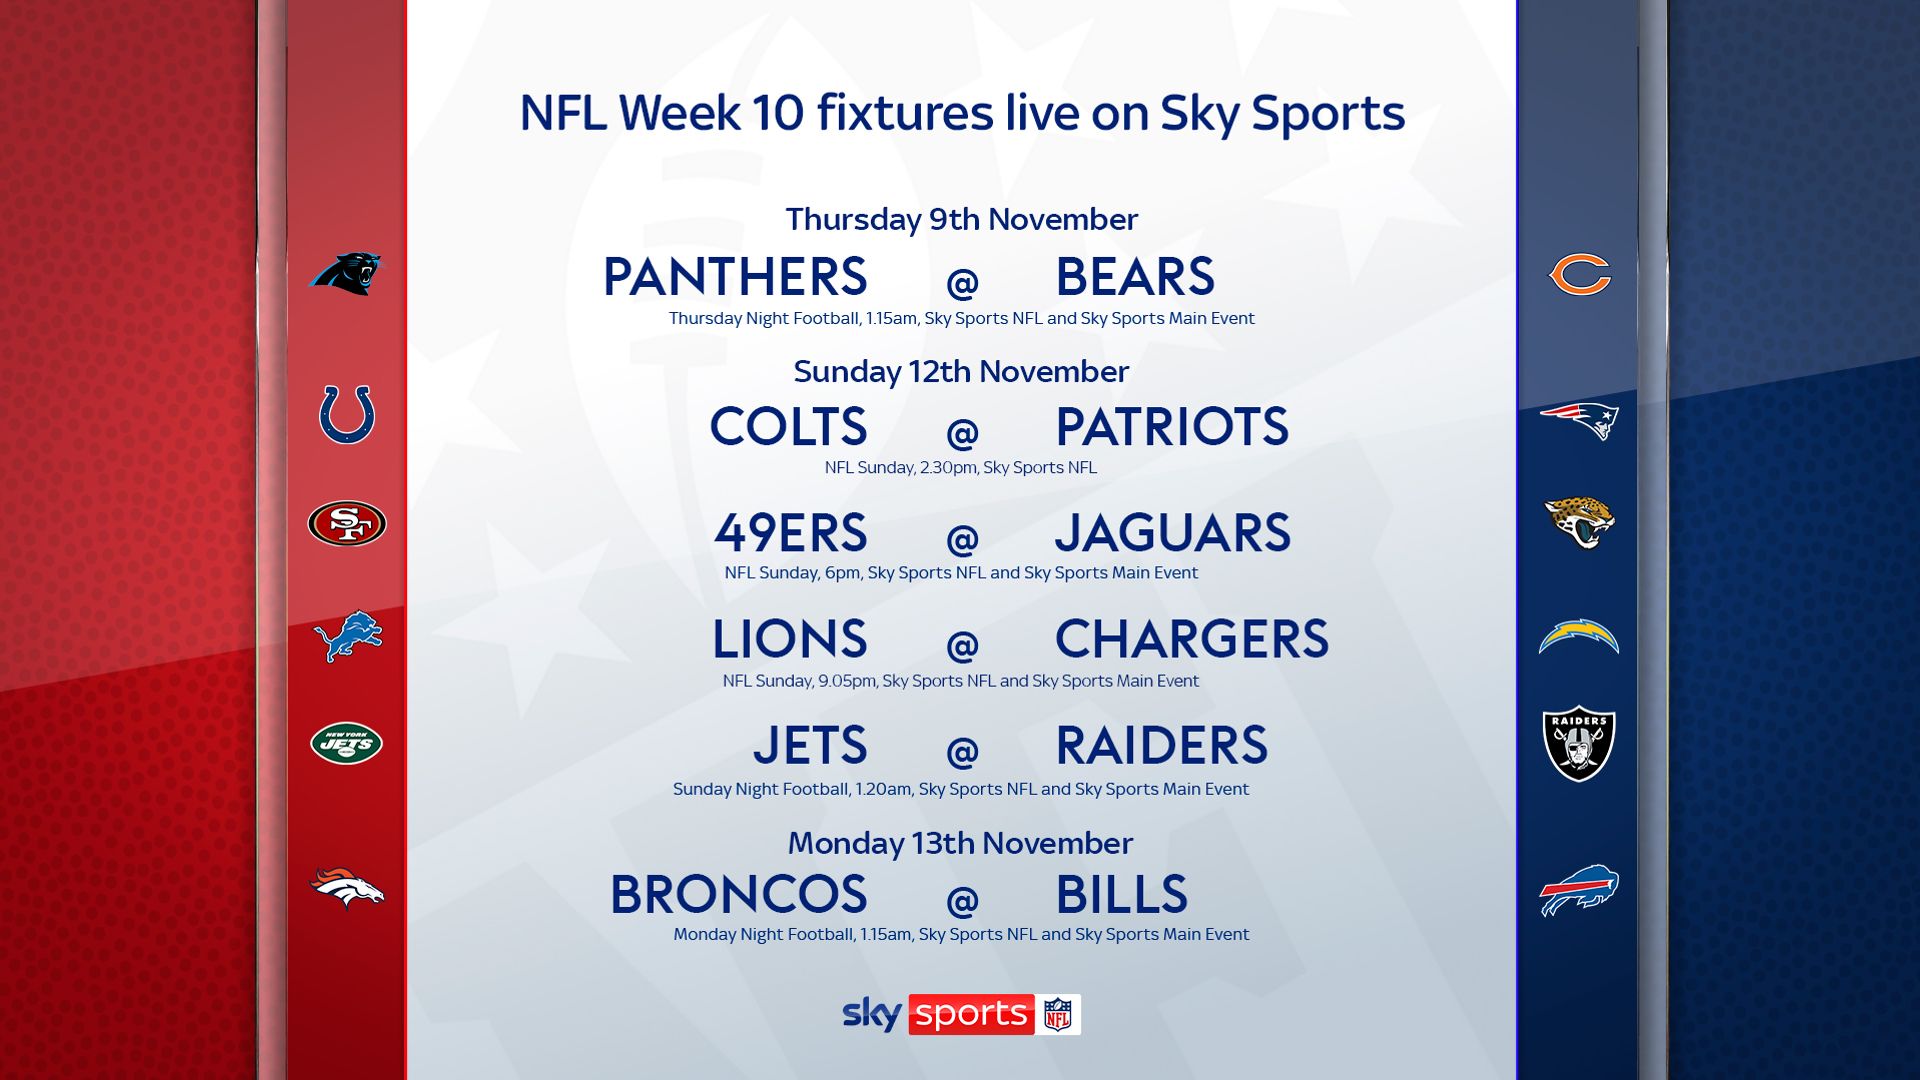 Which NFL games are live on Sky in Week 10?